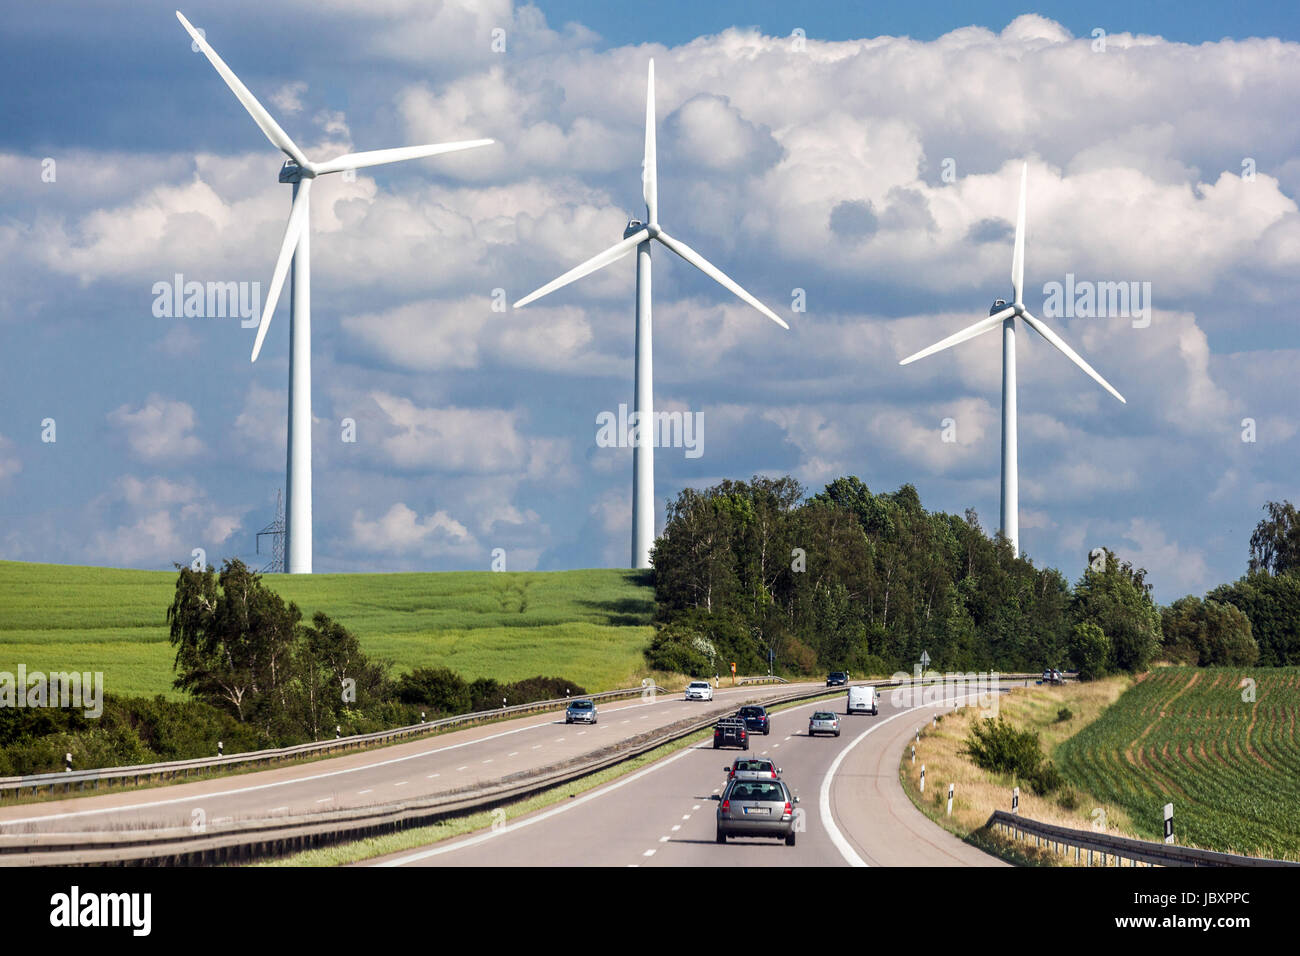 Cars on German highway and power wind turbines Germany Alternative Energy source Germany highway driving Stock Photo